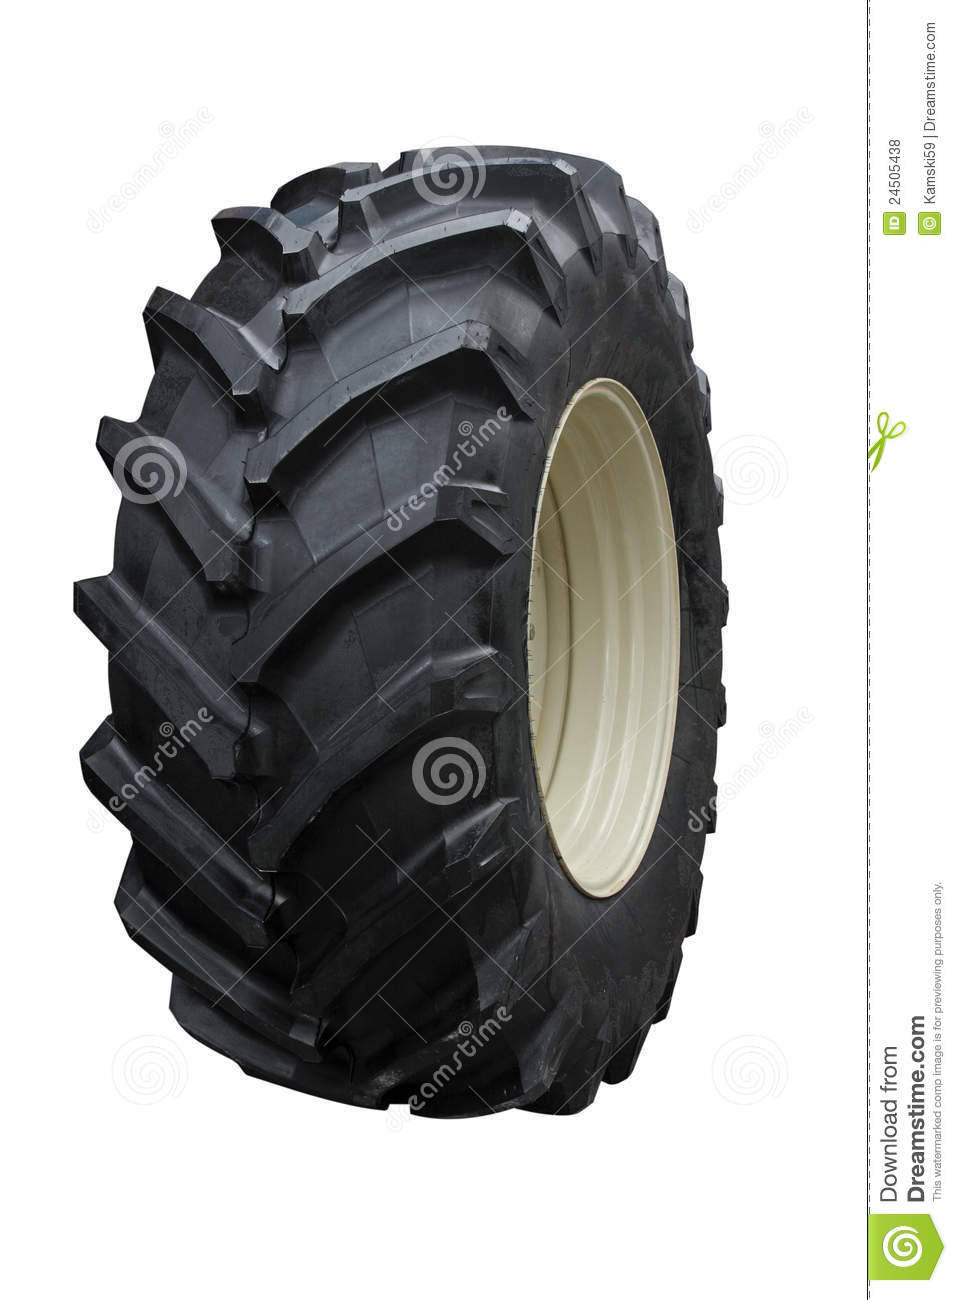 Tractor Tire Royalty Free Stock Photos   Image  24505438